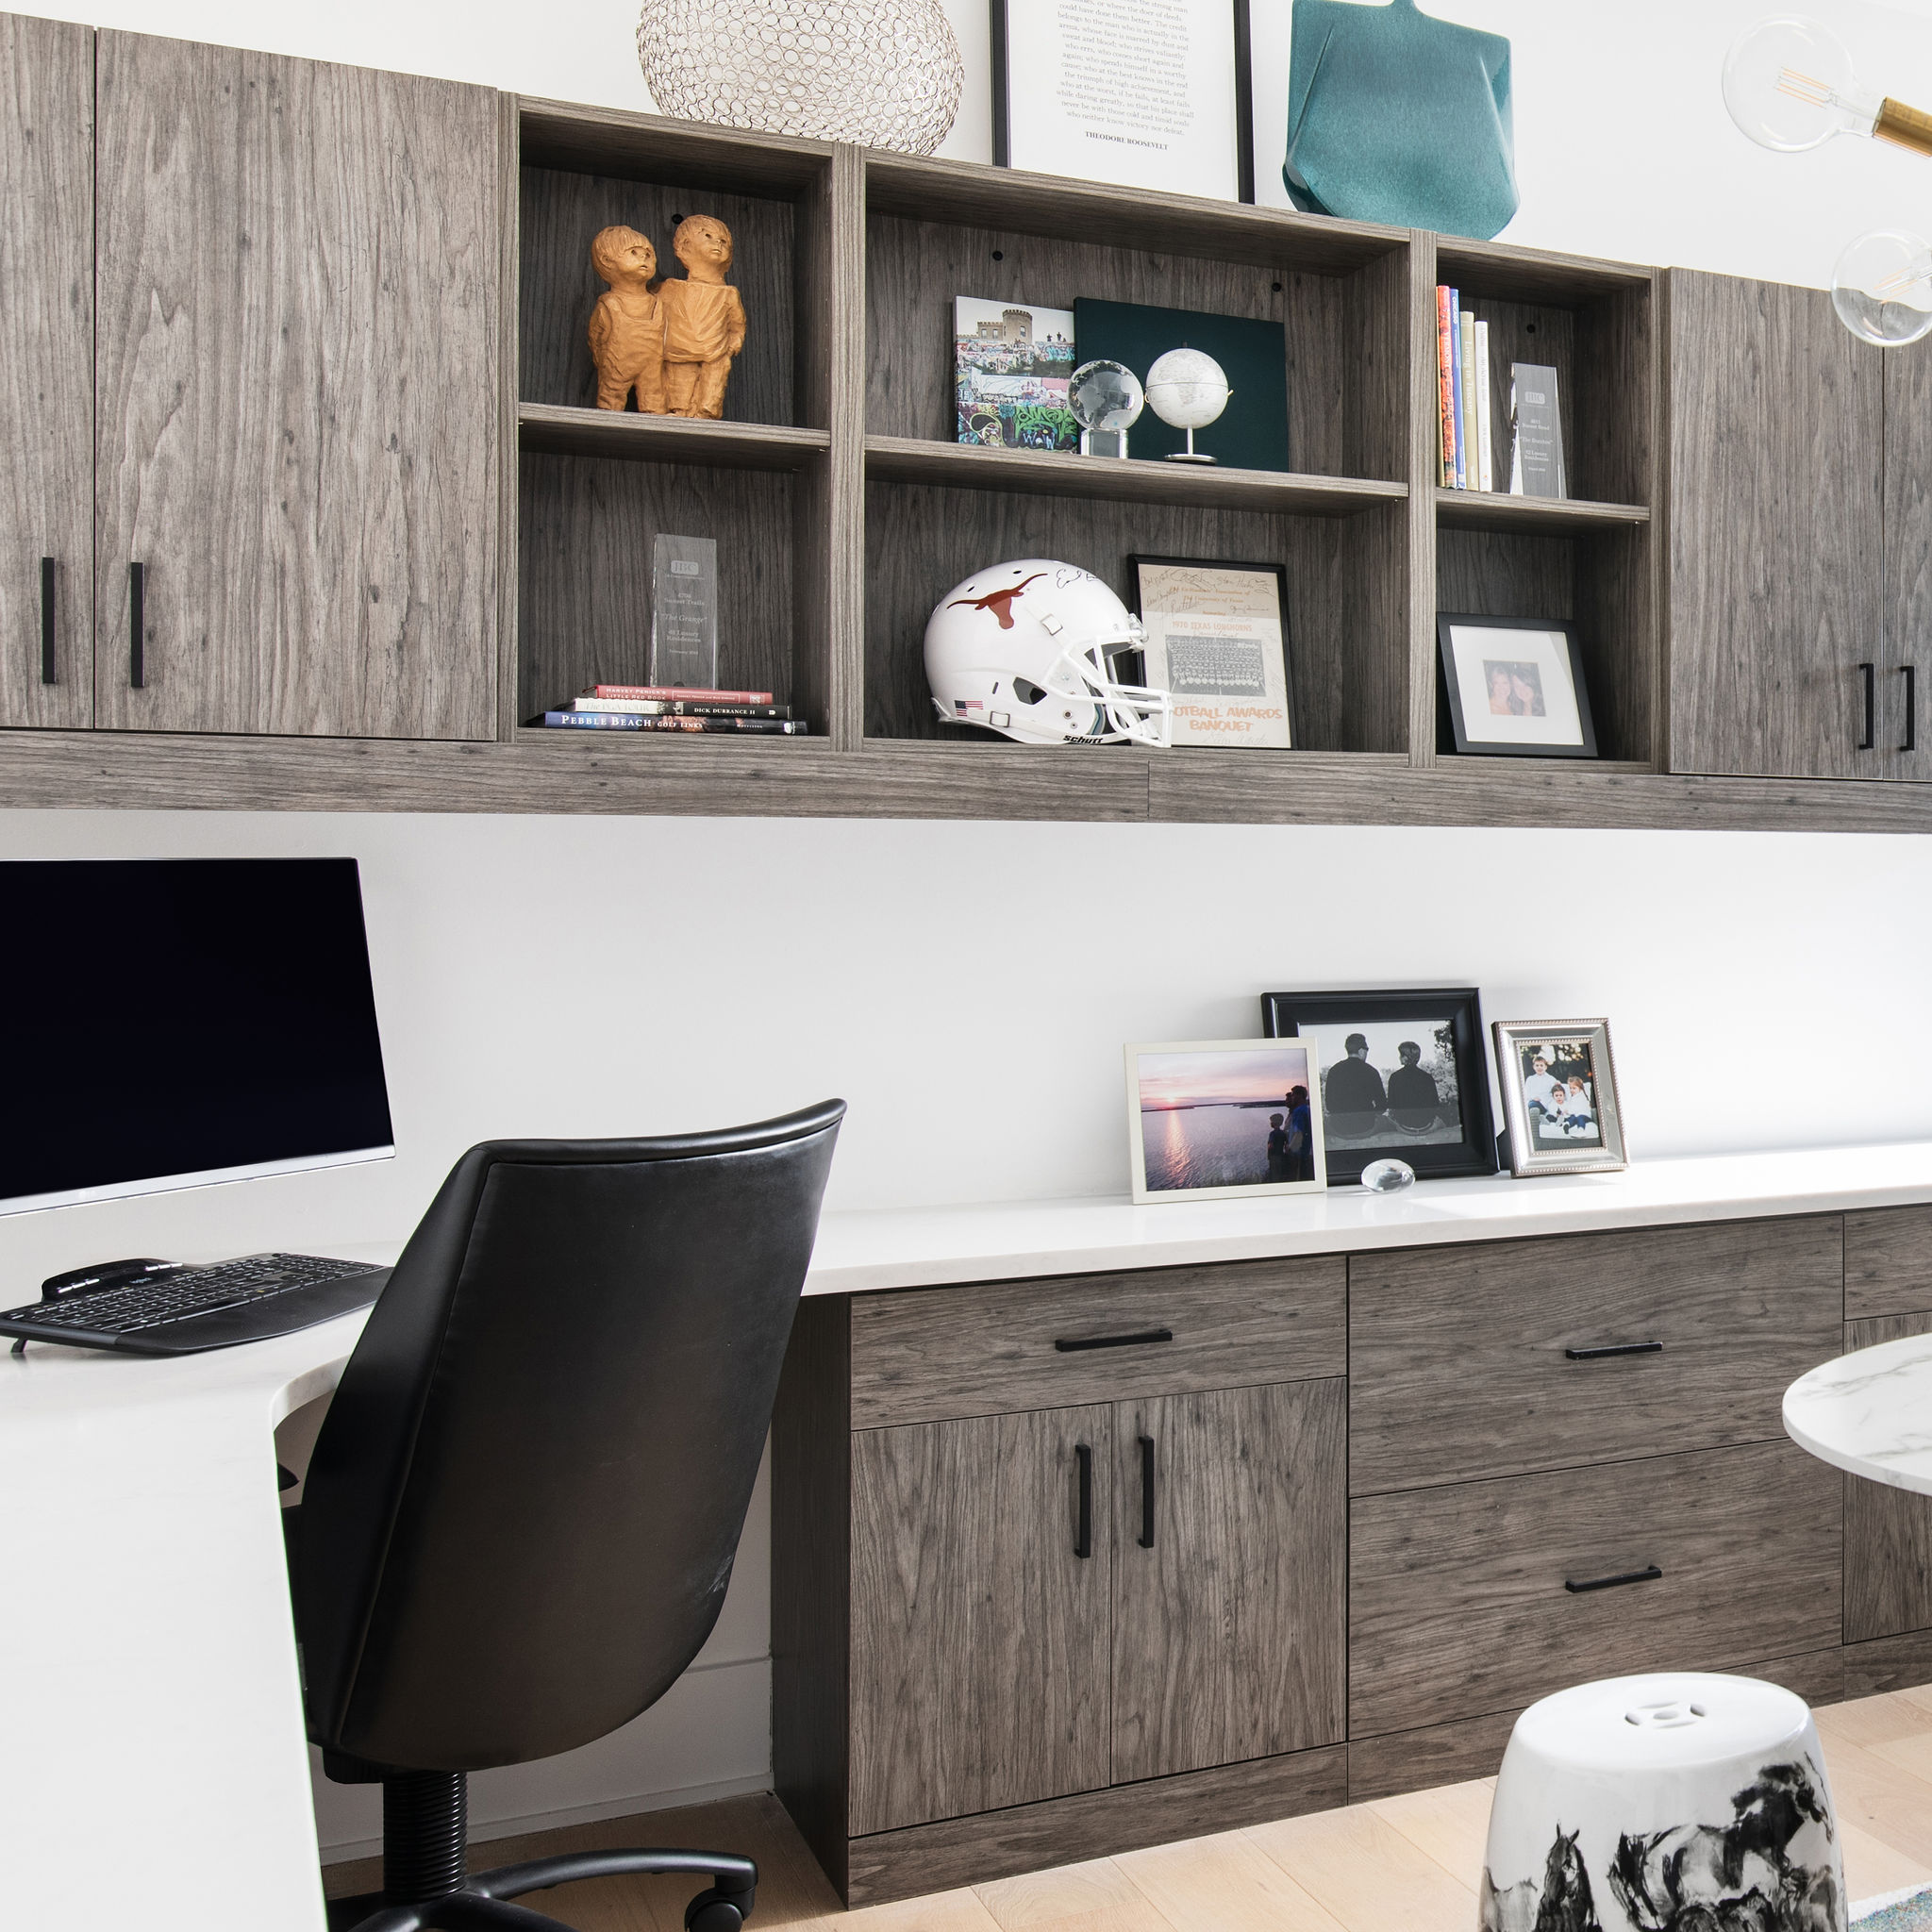 Maximize space with our Home Office. Enjoy a luxury home office and work from home effortlessly, combining functionality and style. Discover versatile solutions for small spaces. Consider a home office design today!